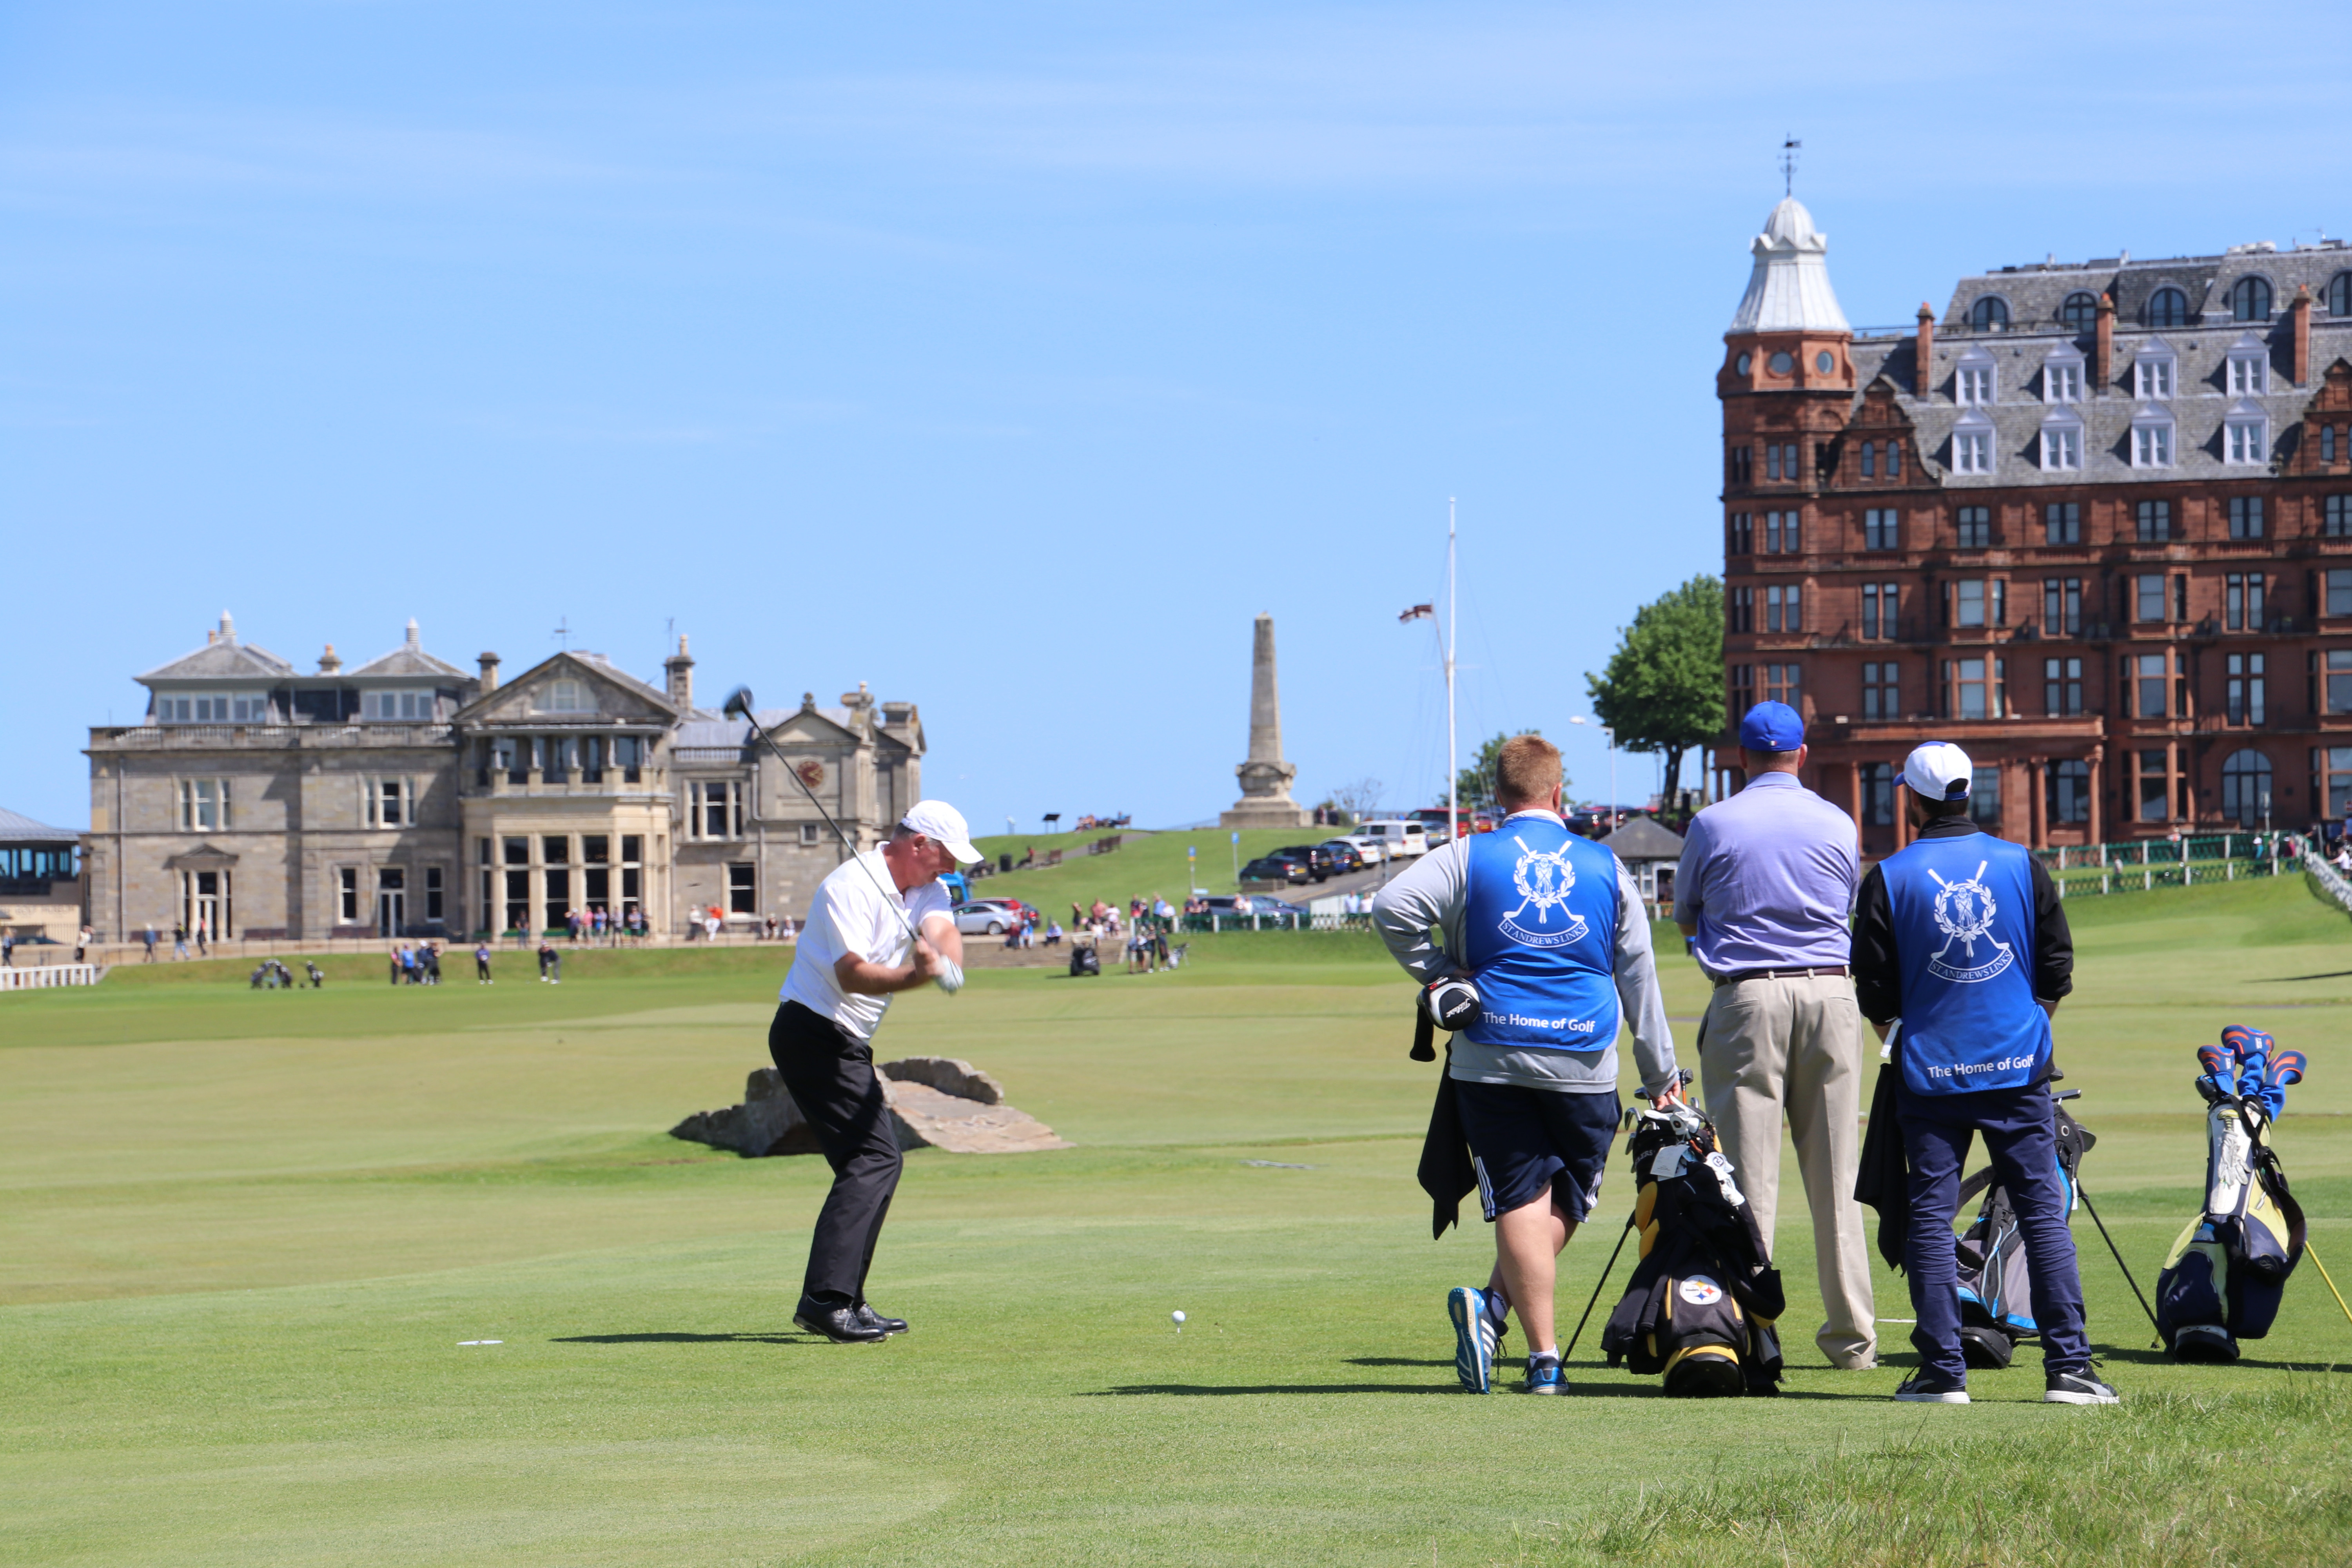 St. Andrews The Old Course, R&A Clubhouse - a magic moment for any Golfer